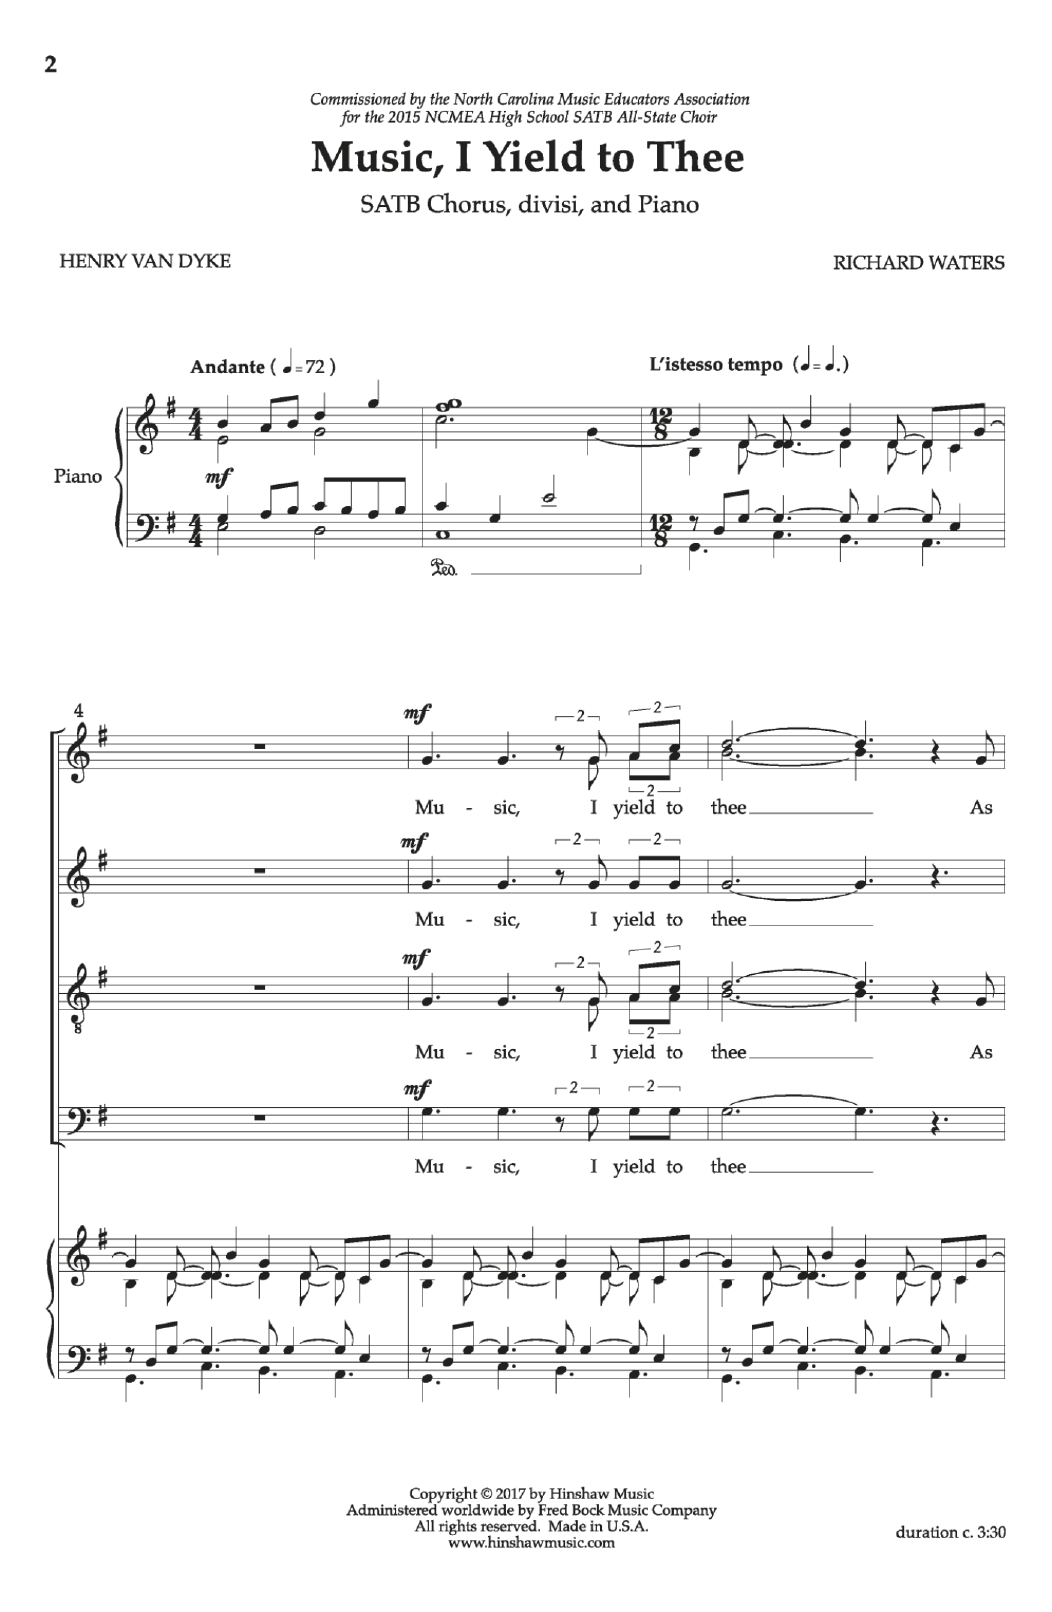 Download Henry van Dyke Music, I Yield to Thee Sheet Music